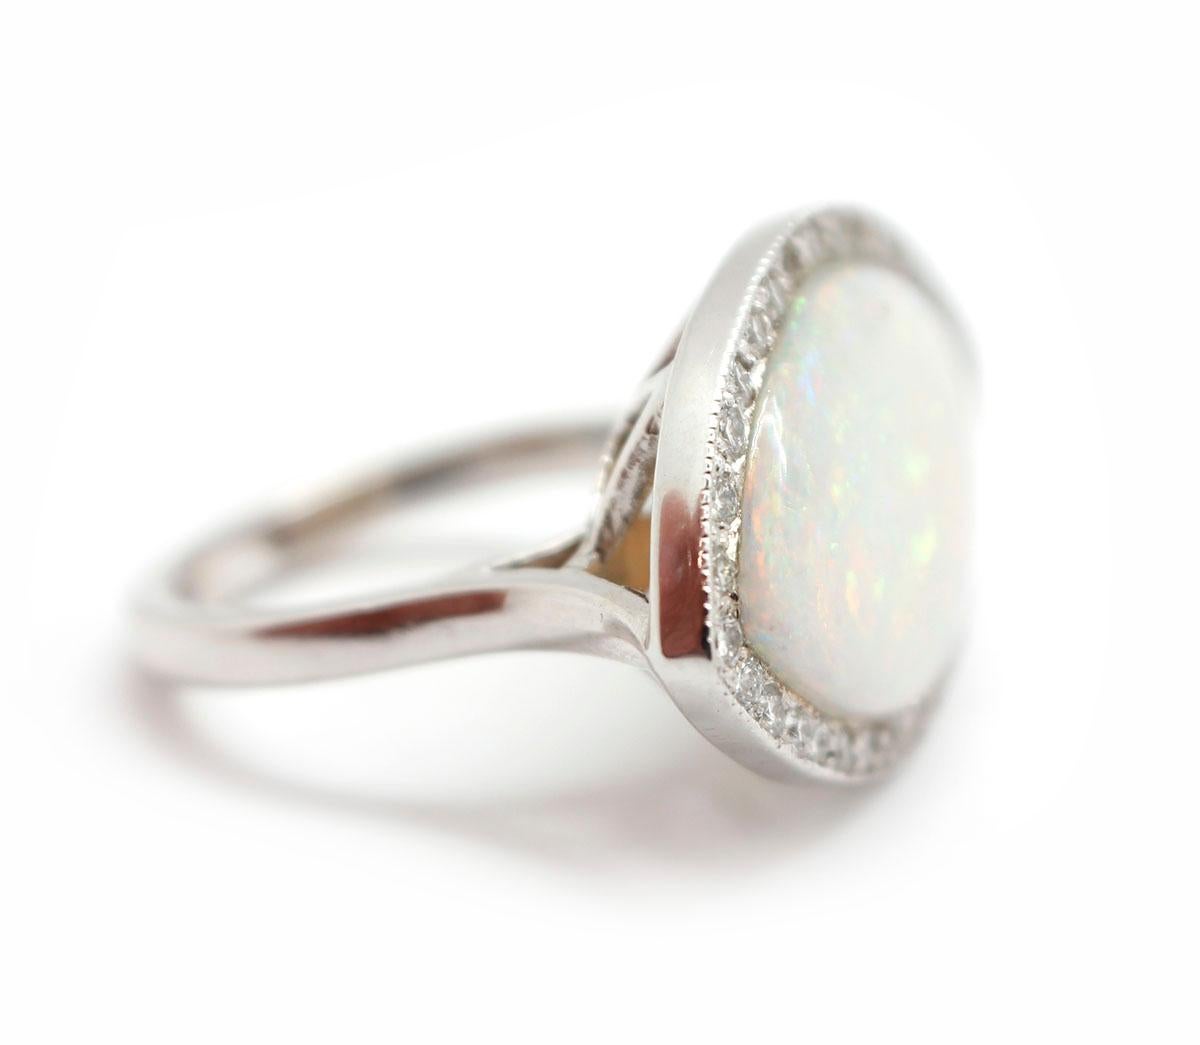 This one of a kind ring is made in 14k white gold. It features a marquise-cut opal in the center of a diamond bezel. There are 32 diamonds for a total weight of 0.32ct. The stones are graded G-H in color and VS-SI in clarity. The ring measures